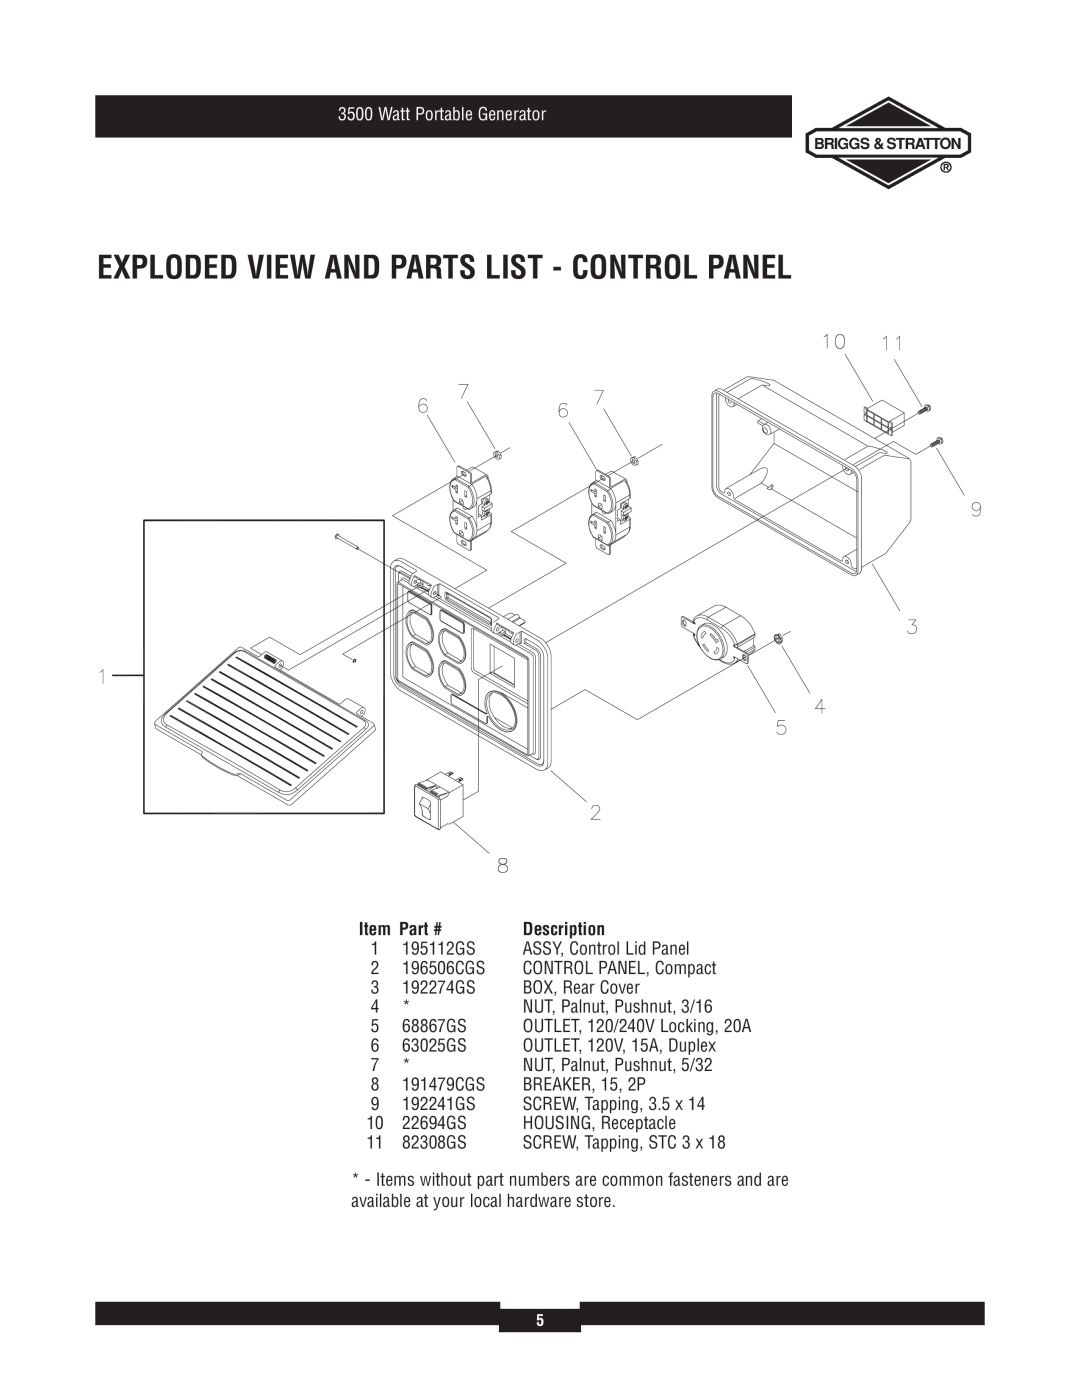 Briggs & Stratton 30218 manual Exploded View And Parts List - Control Panel, Watt Portable Generator 